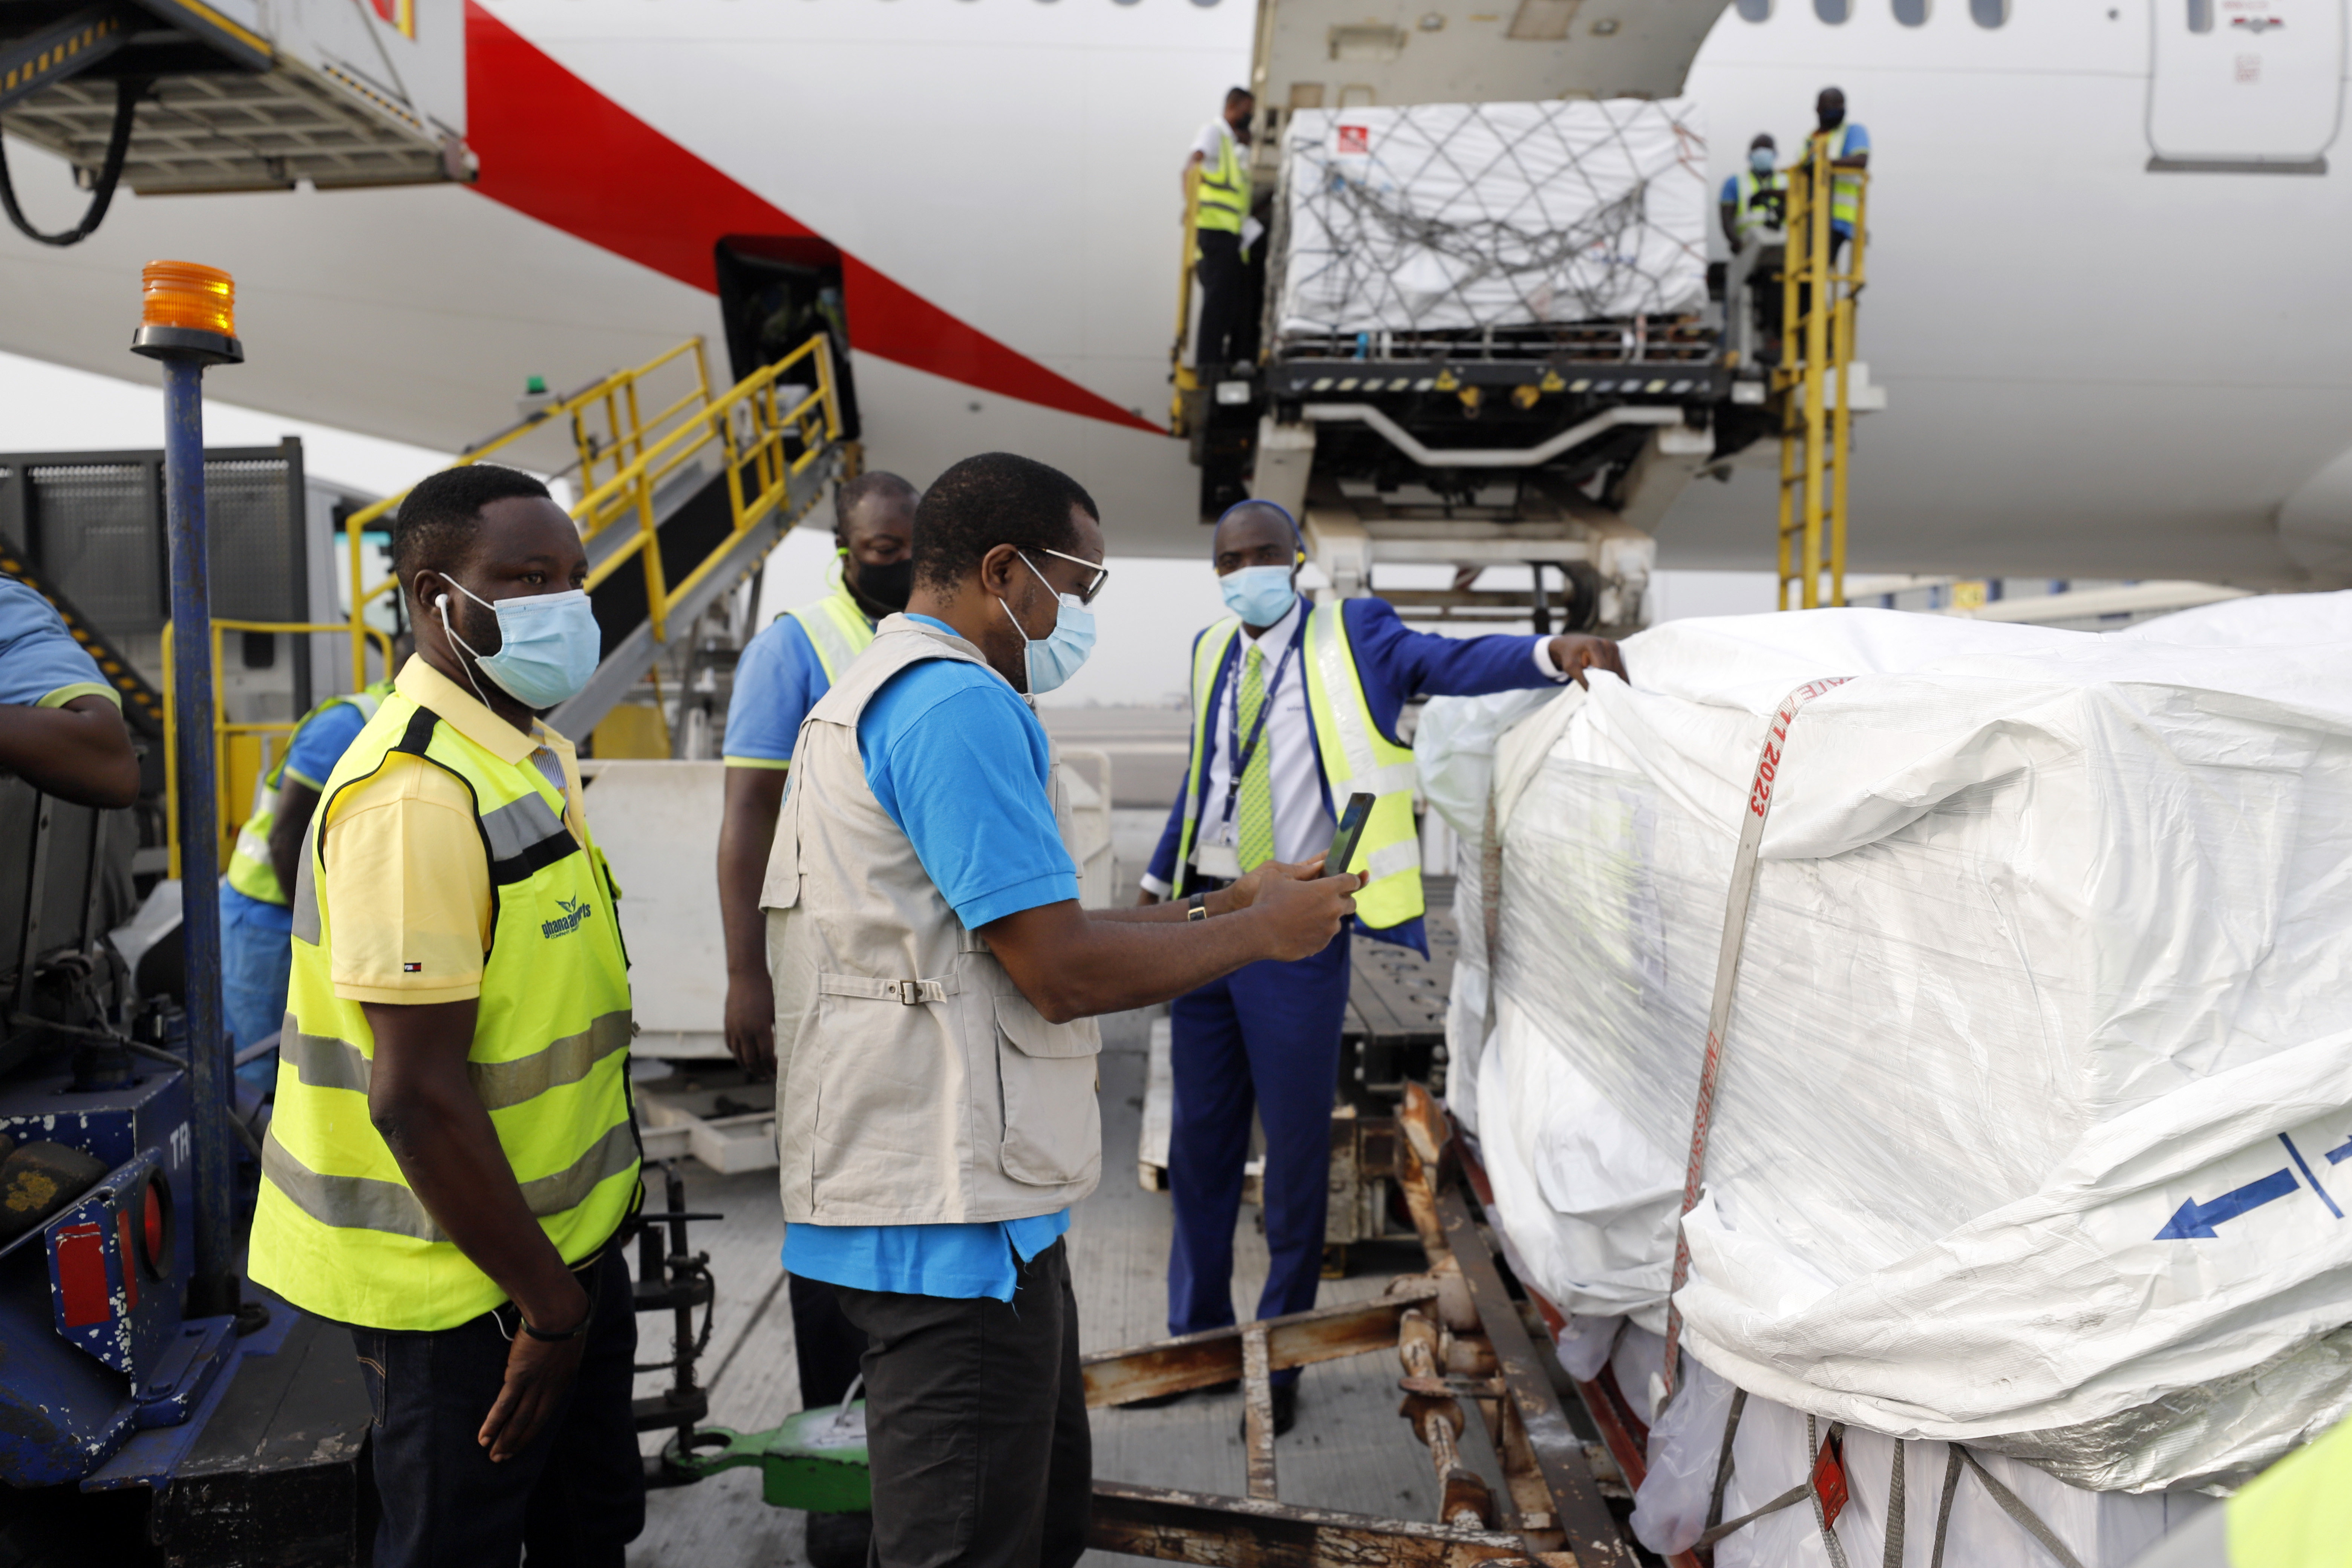 The first shipment of Covid-19 vaccines arrives in Ghana